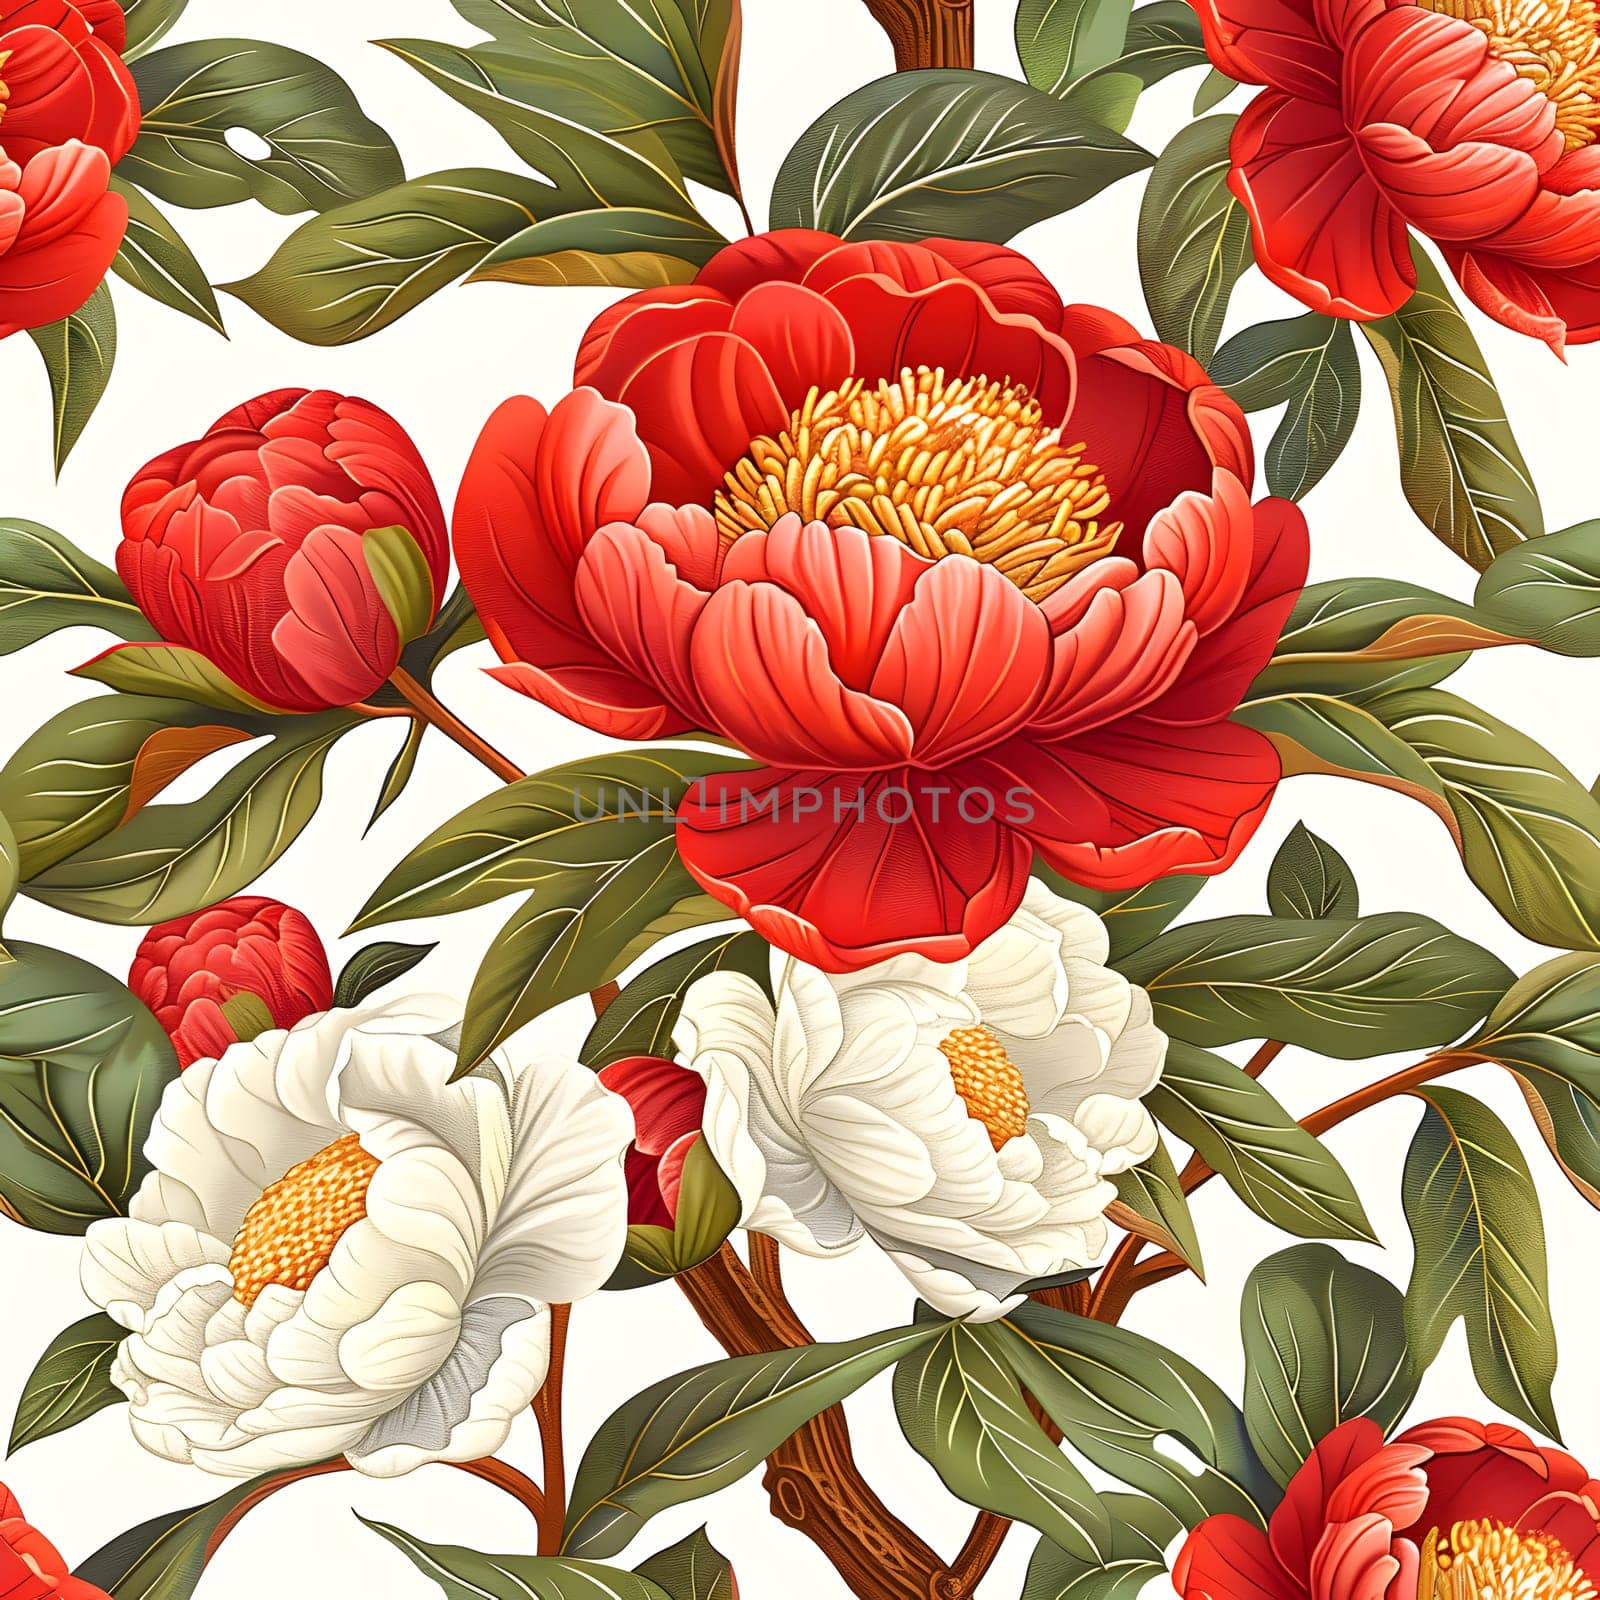 Beautiful red and white flowers with green leaves depicted on a white background. This botanical illustration features intricate details of a flowering plant, perfect for a painting or textile art